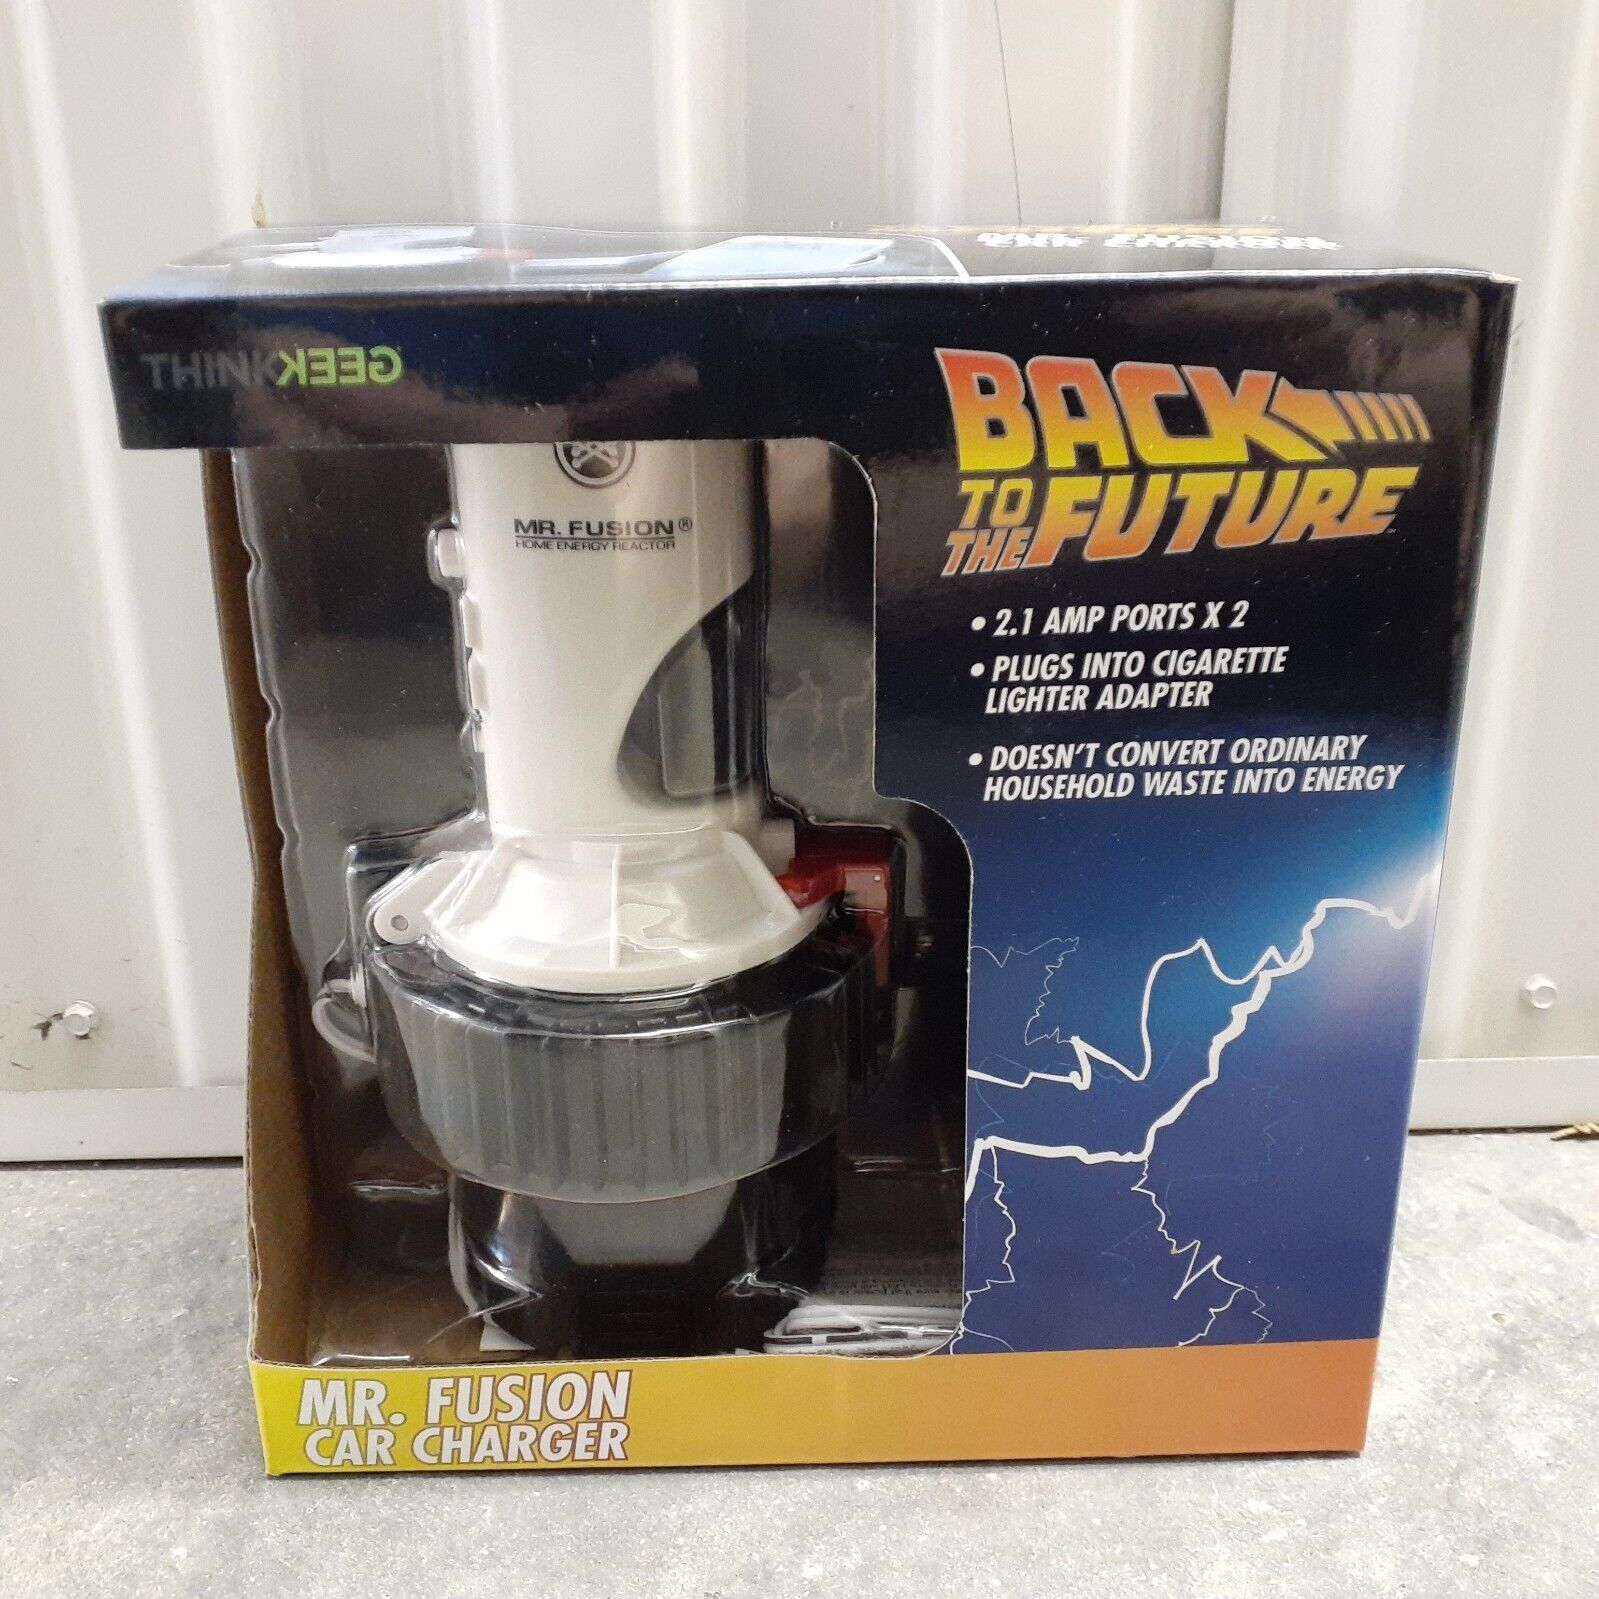 Back To The Future Mr. Fusion Car USB Charger ThinkGeek Collector's Item New 